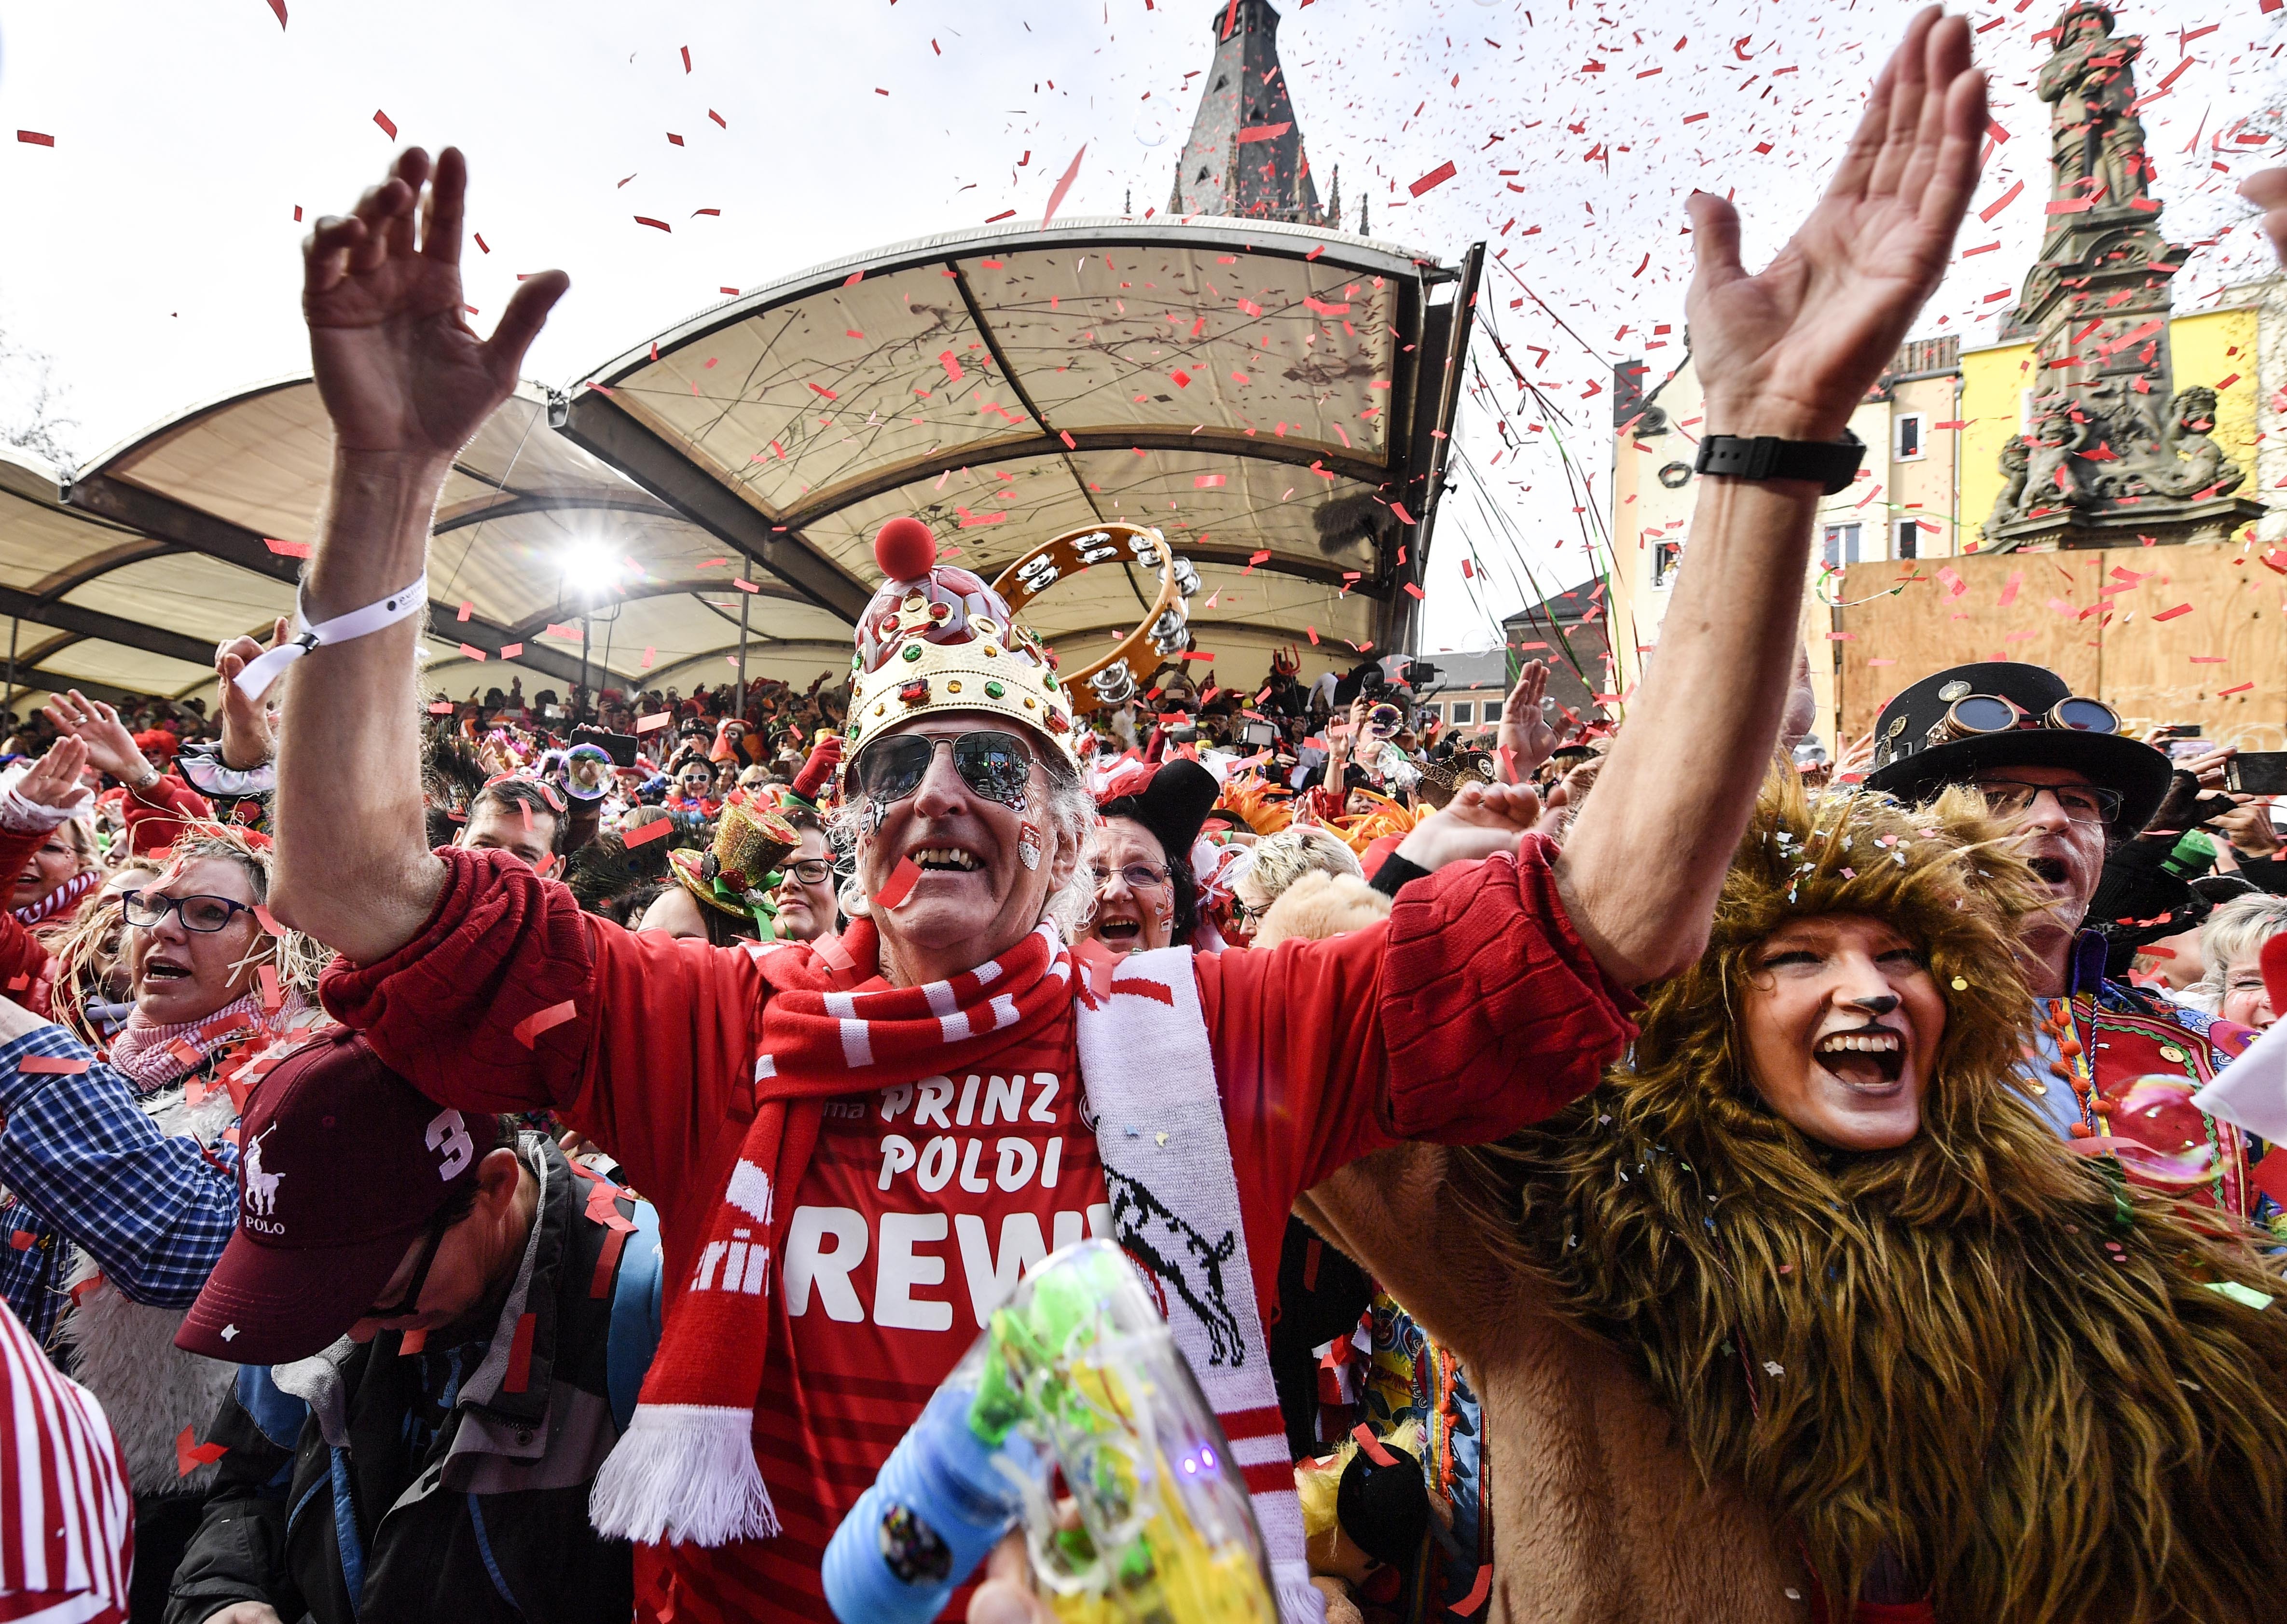 Thousands of revelers dressed in carnival costumes celebrate the start of the street carnival in Cologne, Germany, Thursday, Feb. 28, 2019. (AP Photo/Martin Meissner)